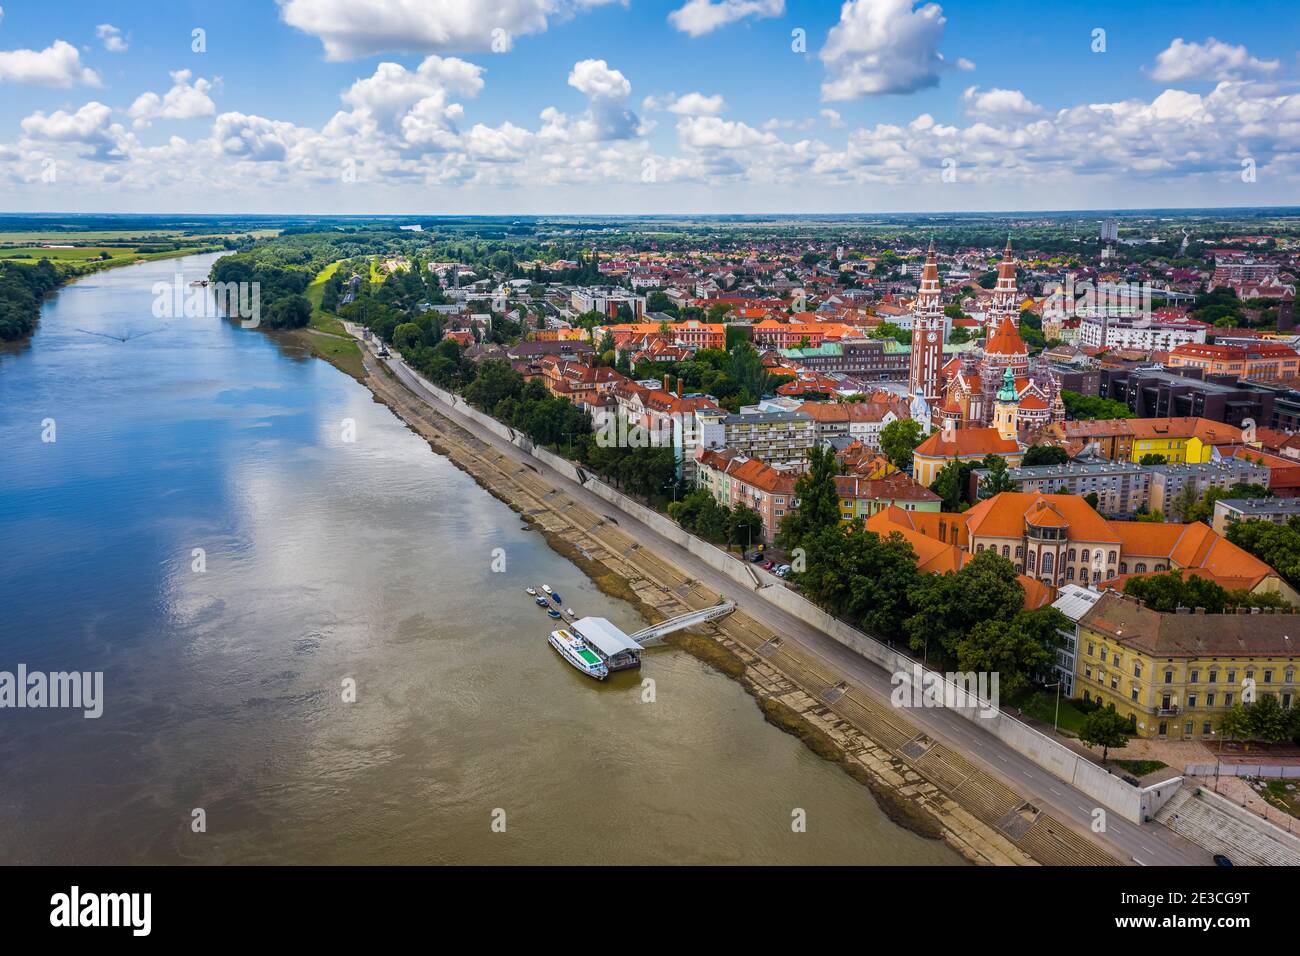 Szeged, Hungary - Aerial view of the Votive Church and Cathedral of Our Lady of Hungary (Szeged Dom) and River Tisza on a sunny summer day with blue s Stock Photo